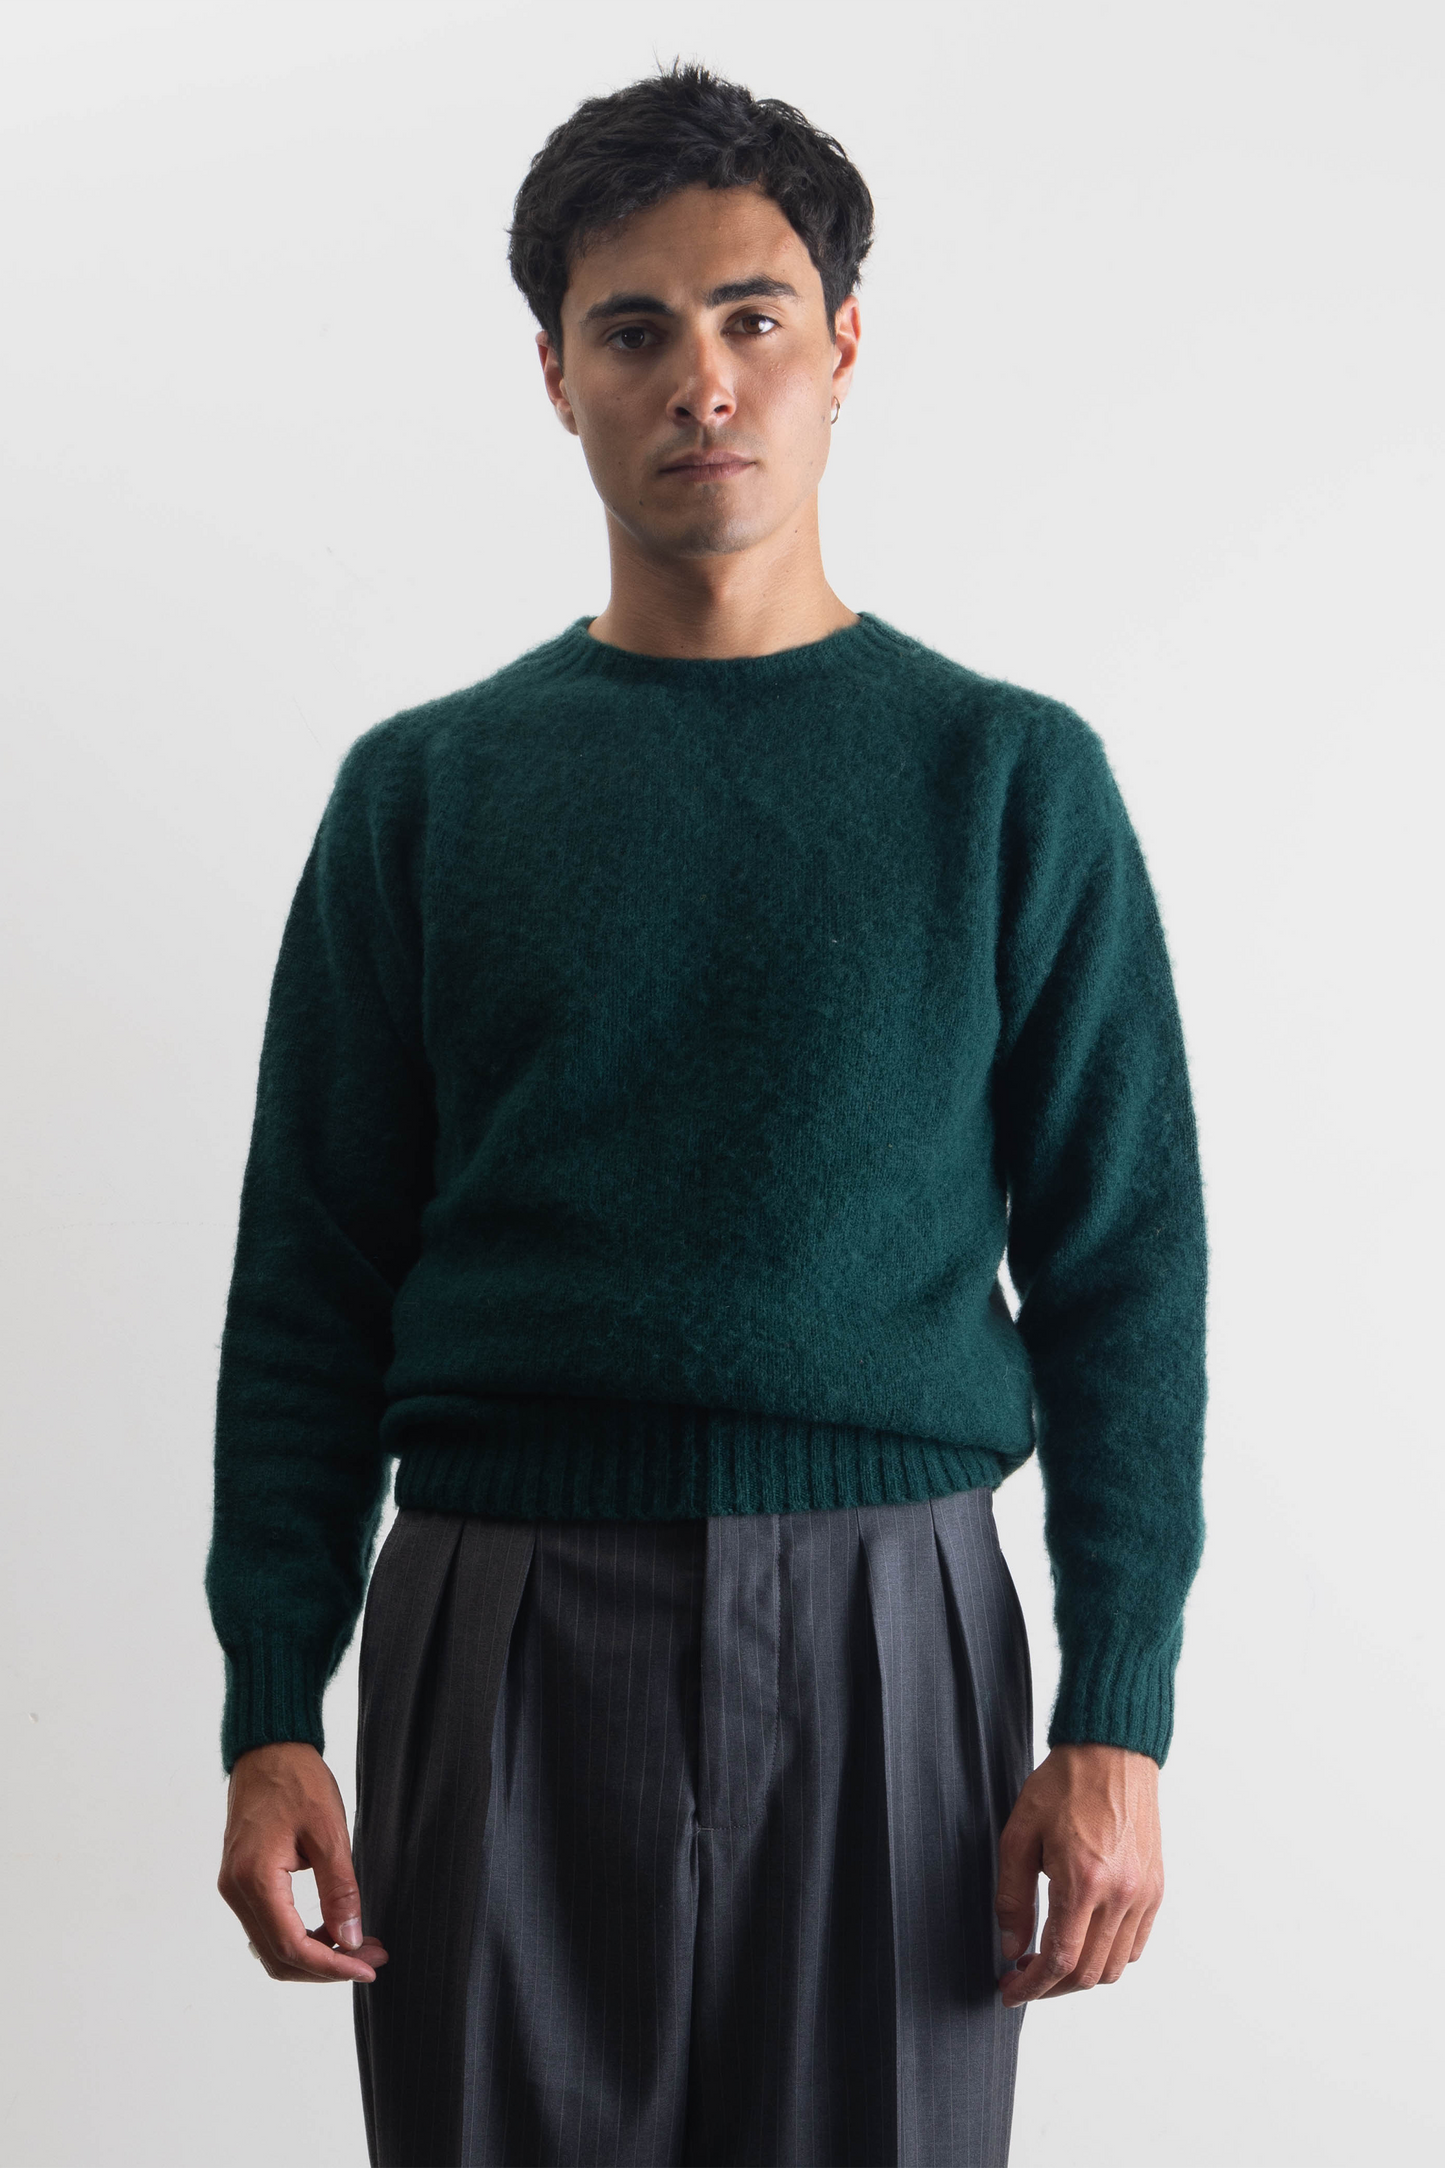 Shaggy Dog sweater in forest green wool